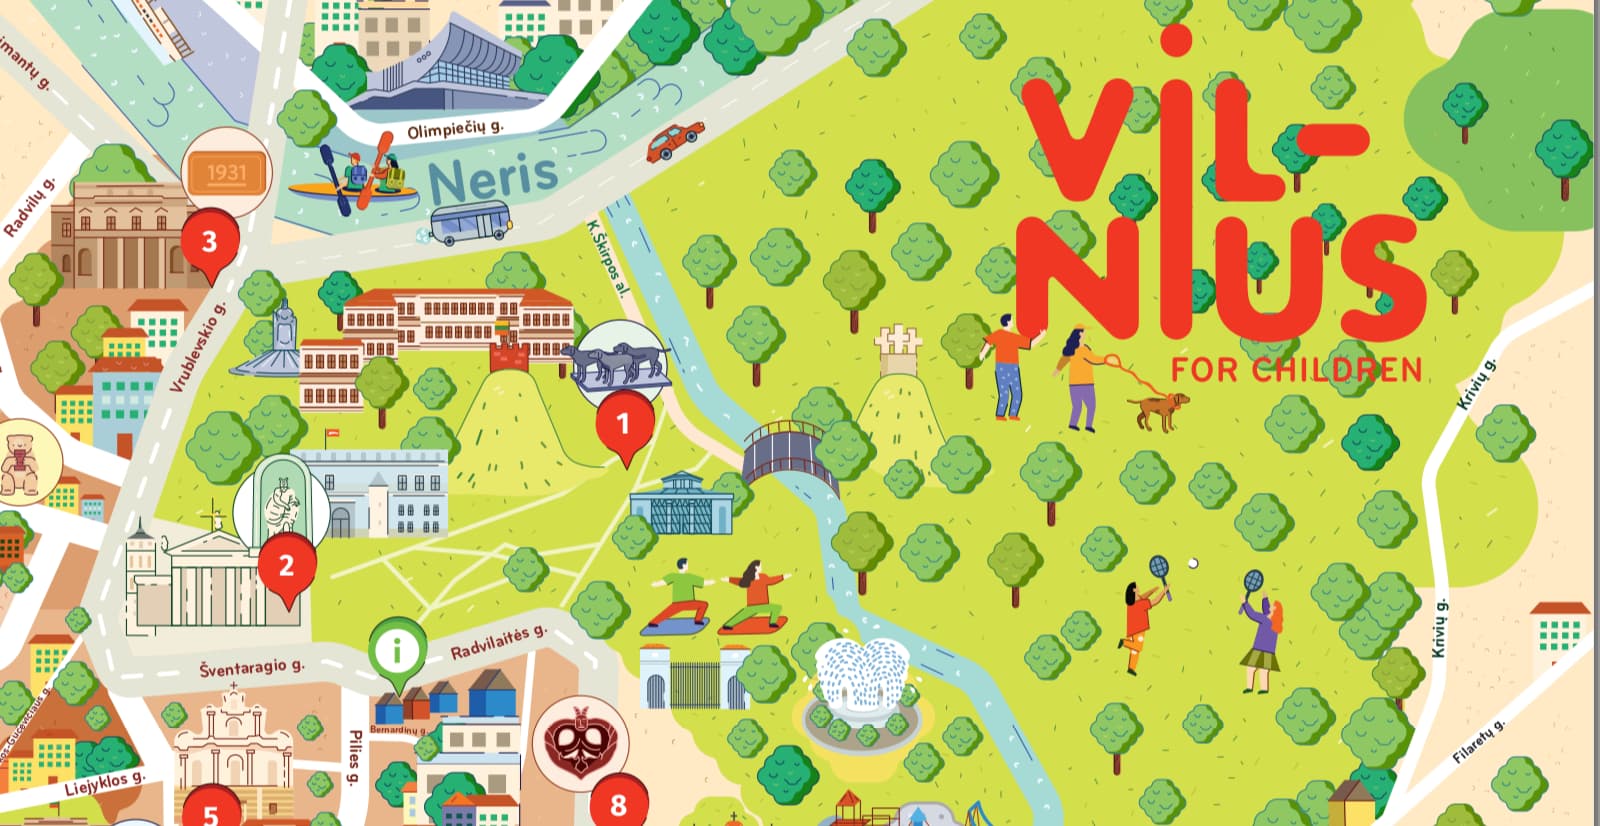 Go Vilnius map to discover Vilnius Old Town with children